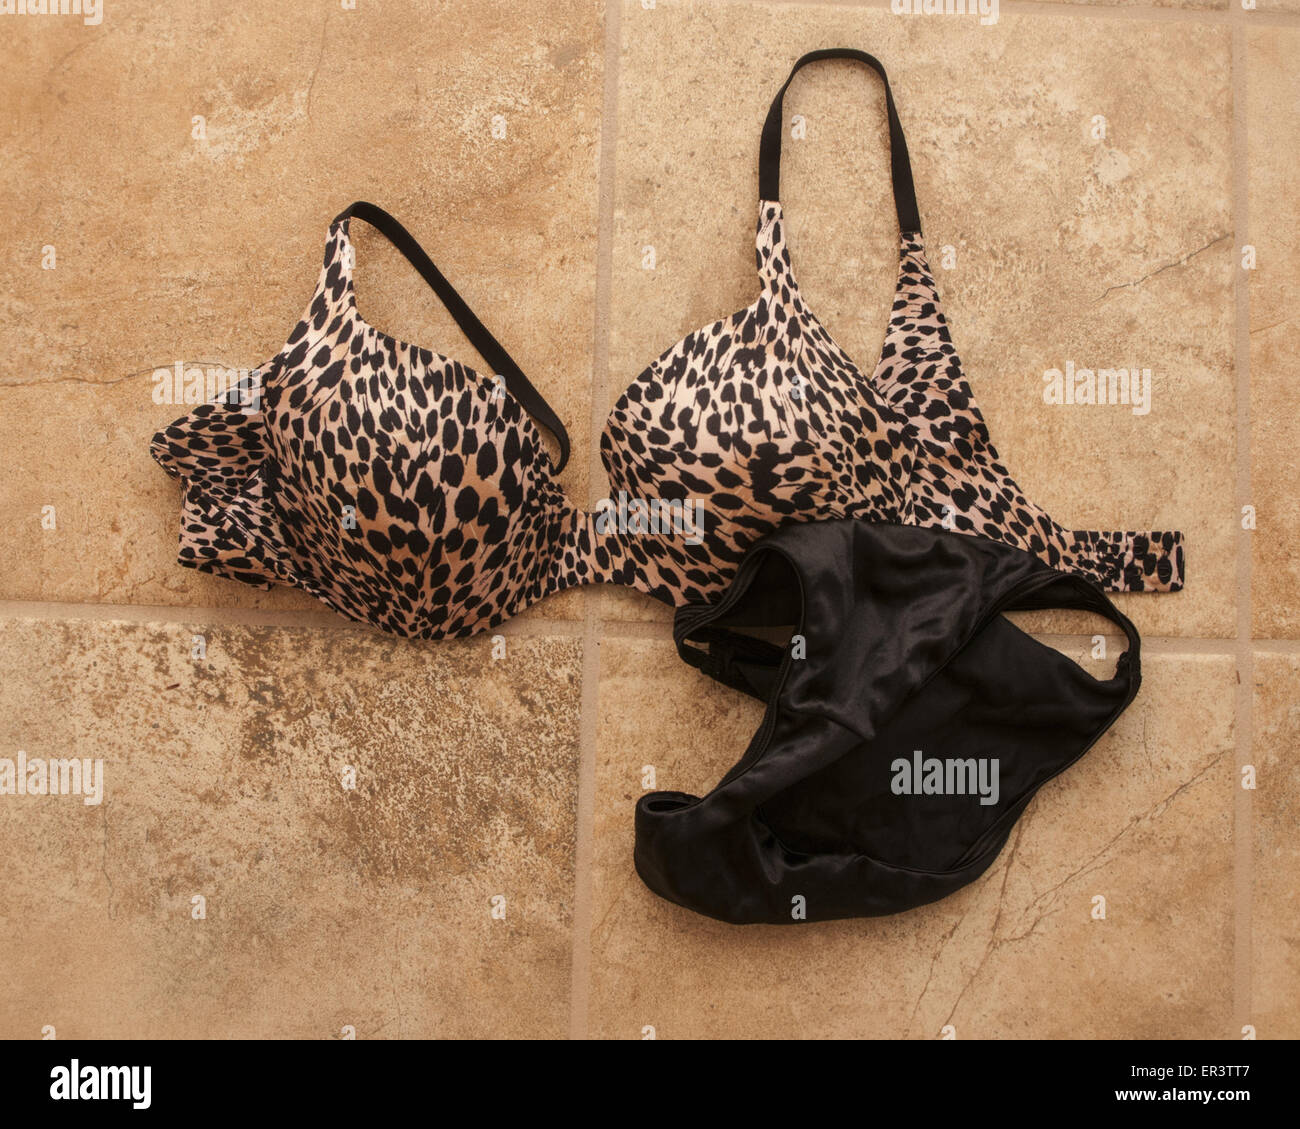 Lingerie, a bra and black panties, lying on a beige tile floor Stock Photo  - Alamy